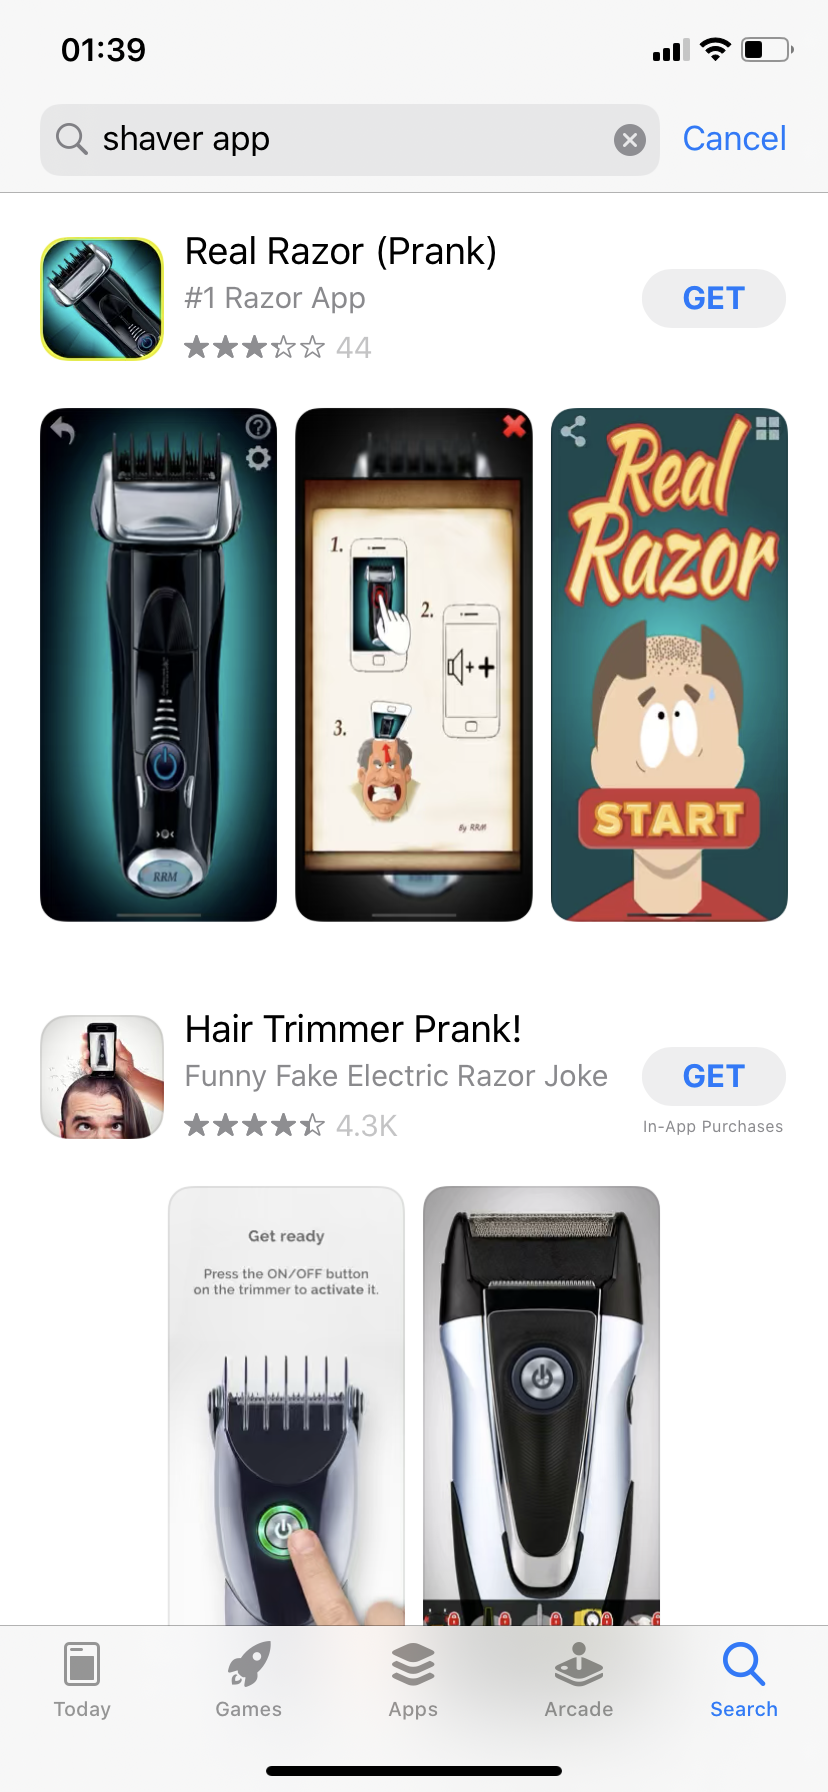 A screengrab from the apple app store showing two razor prank apps available for purchase